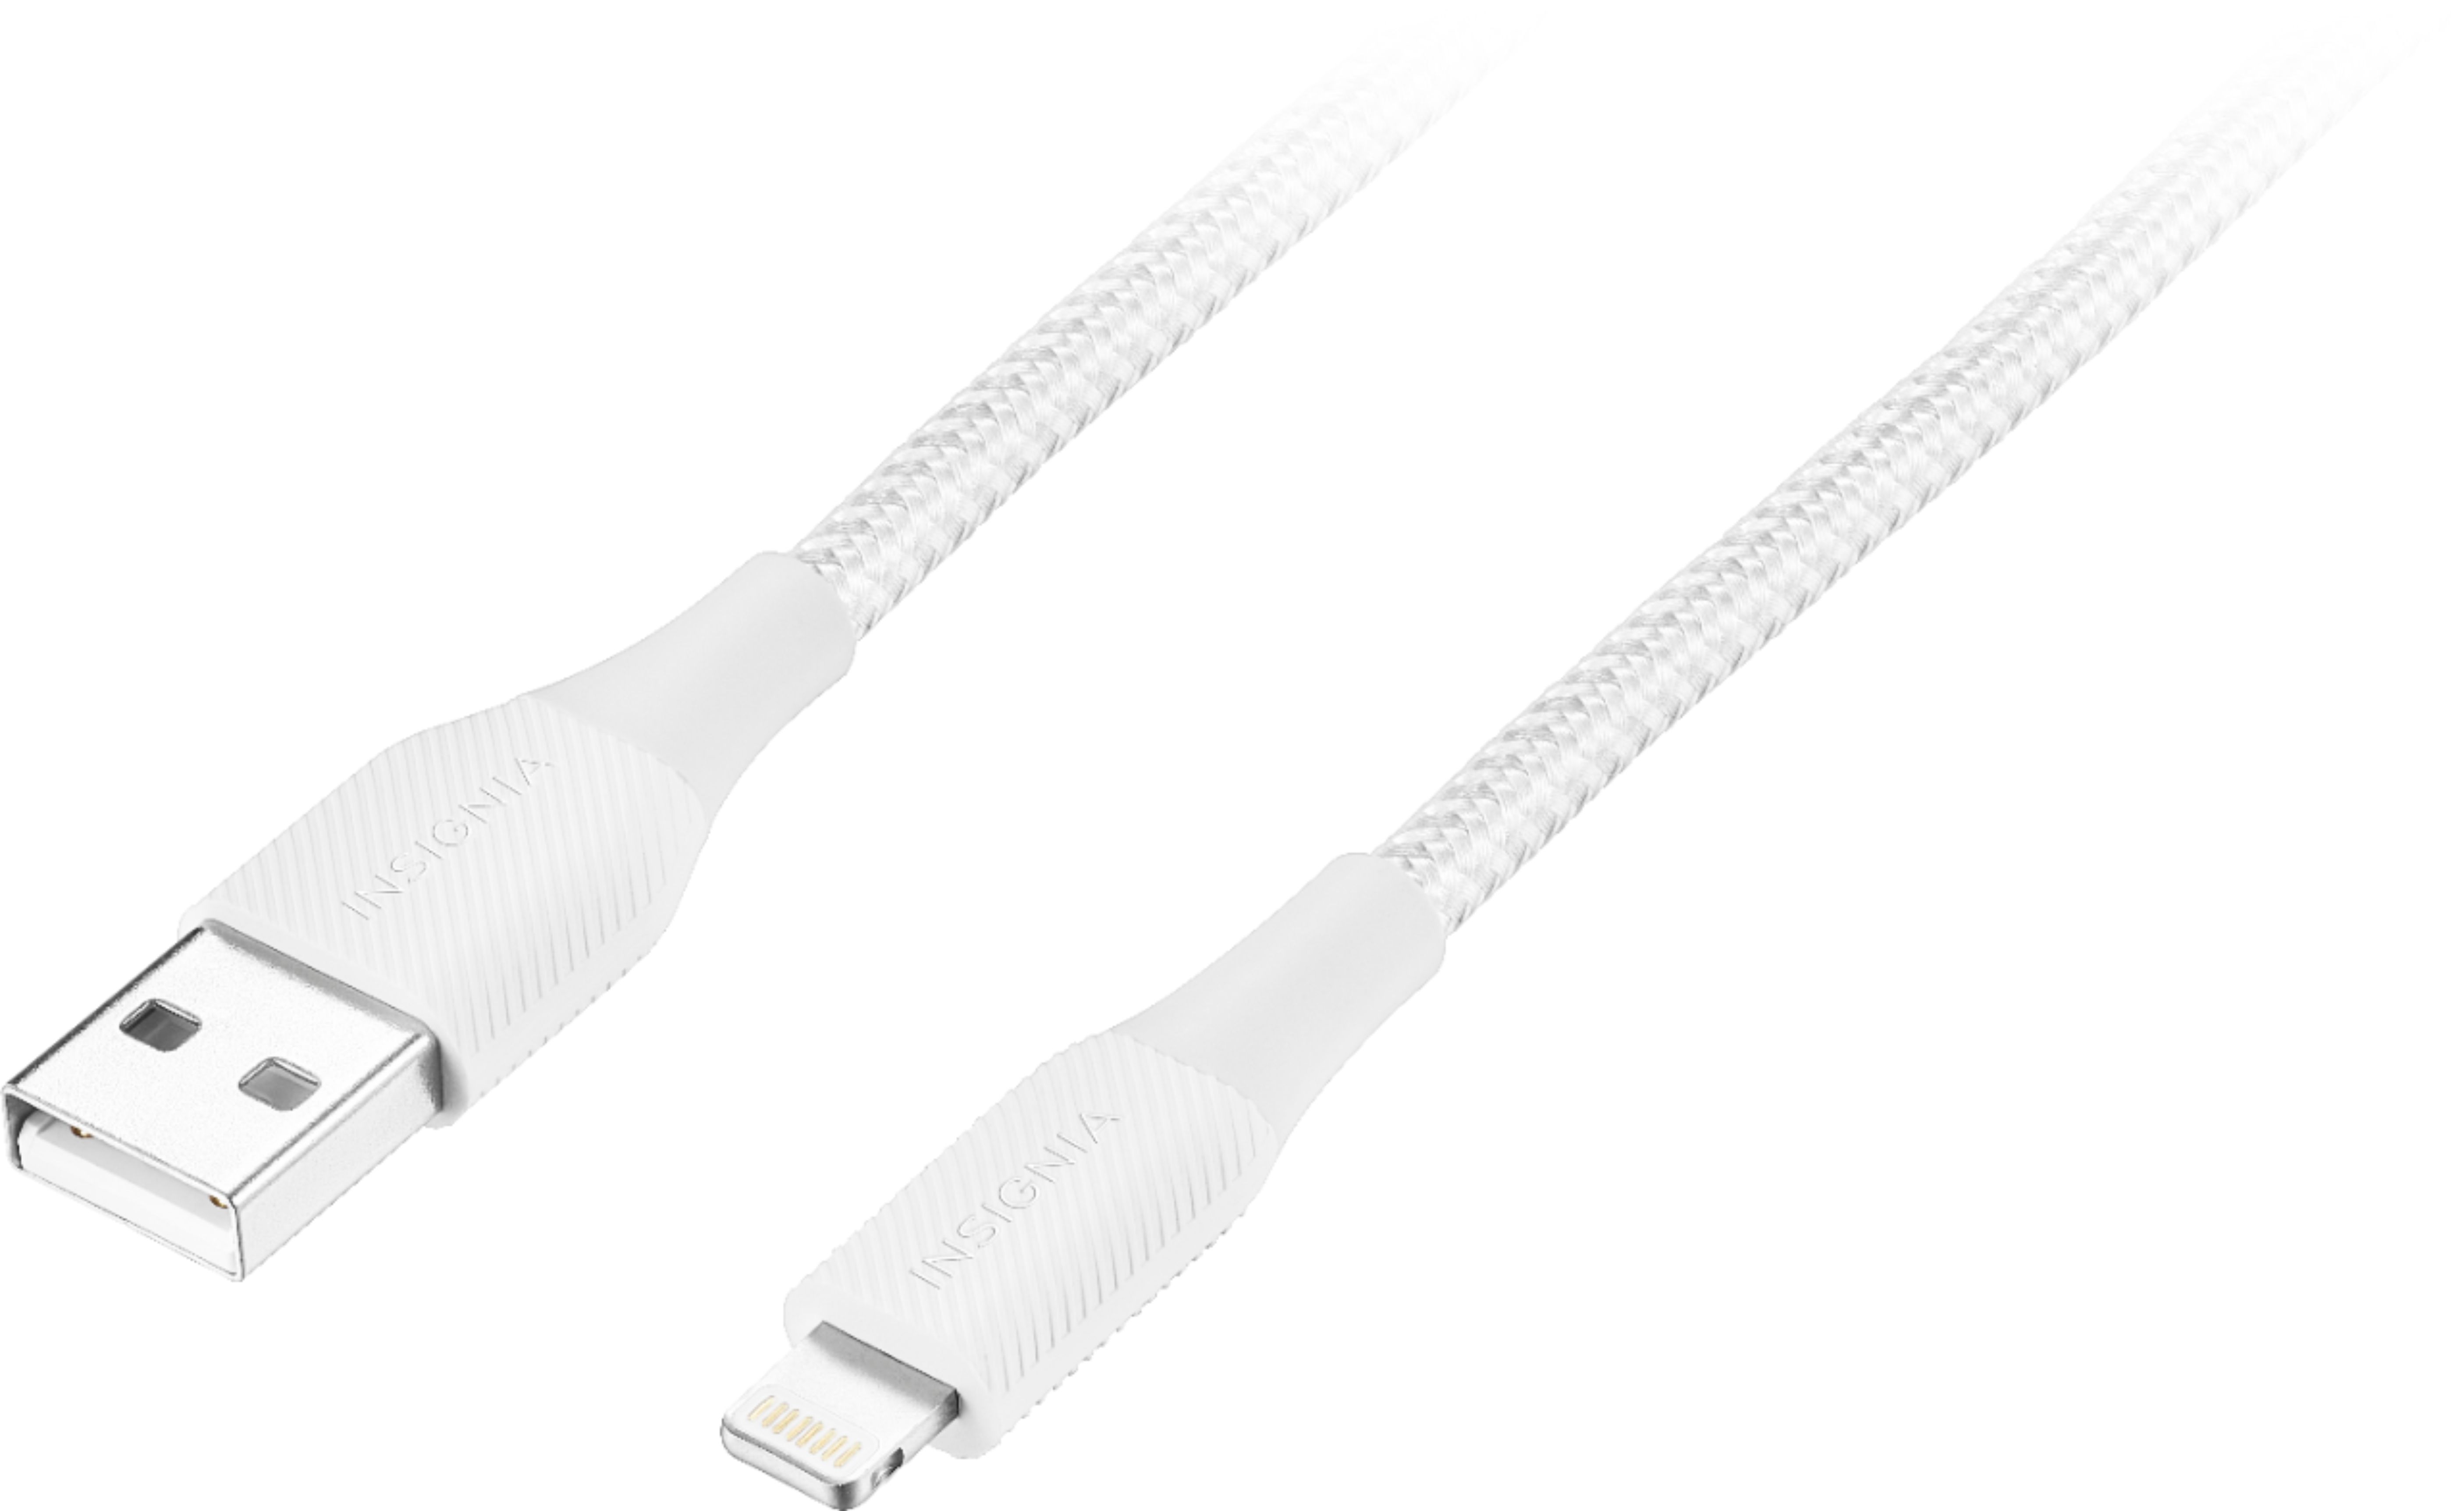 iphone charger cable - Best Buy